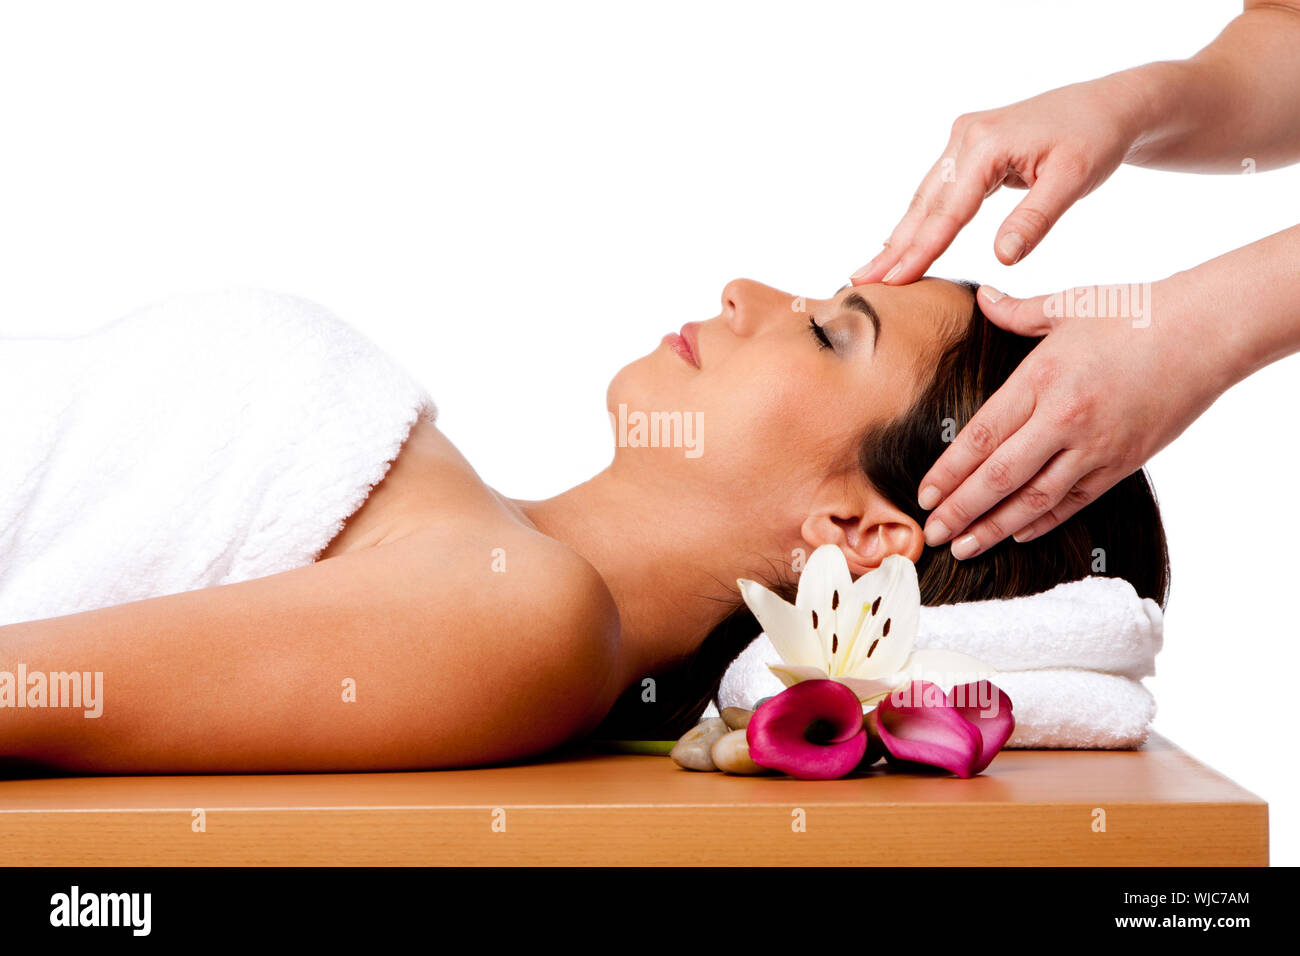 Beautiful happy peaceful sleeping woman at a spa, laying on wooden massage table with head on pillow wearing a towel getting a facial massage, isolate Stock Photo